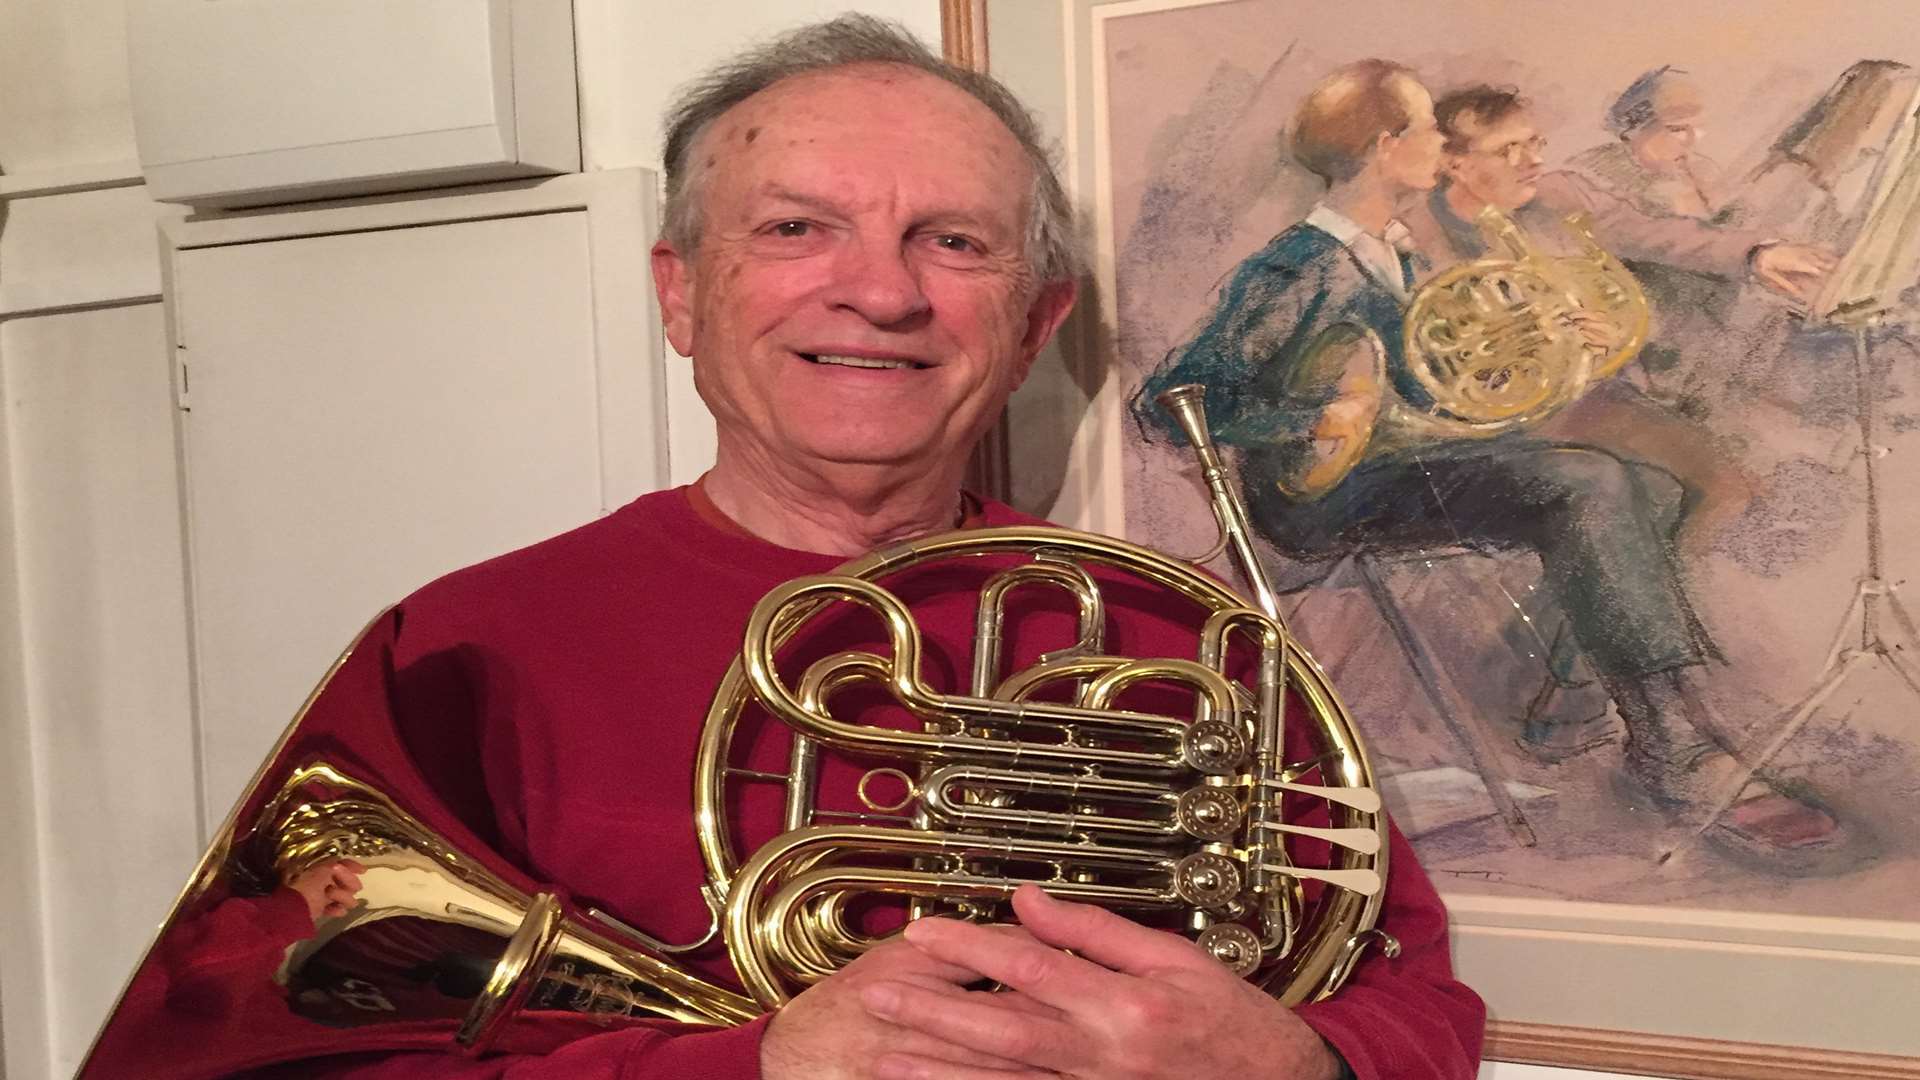 Steve Migden plays the french horn on The Beatles classic Hey Jude.